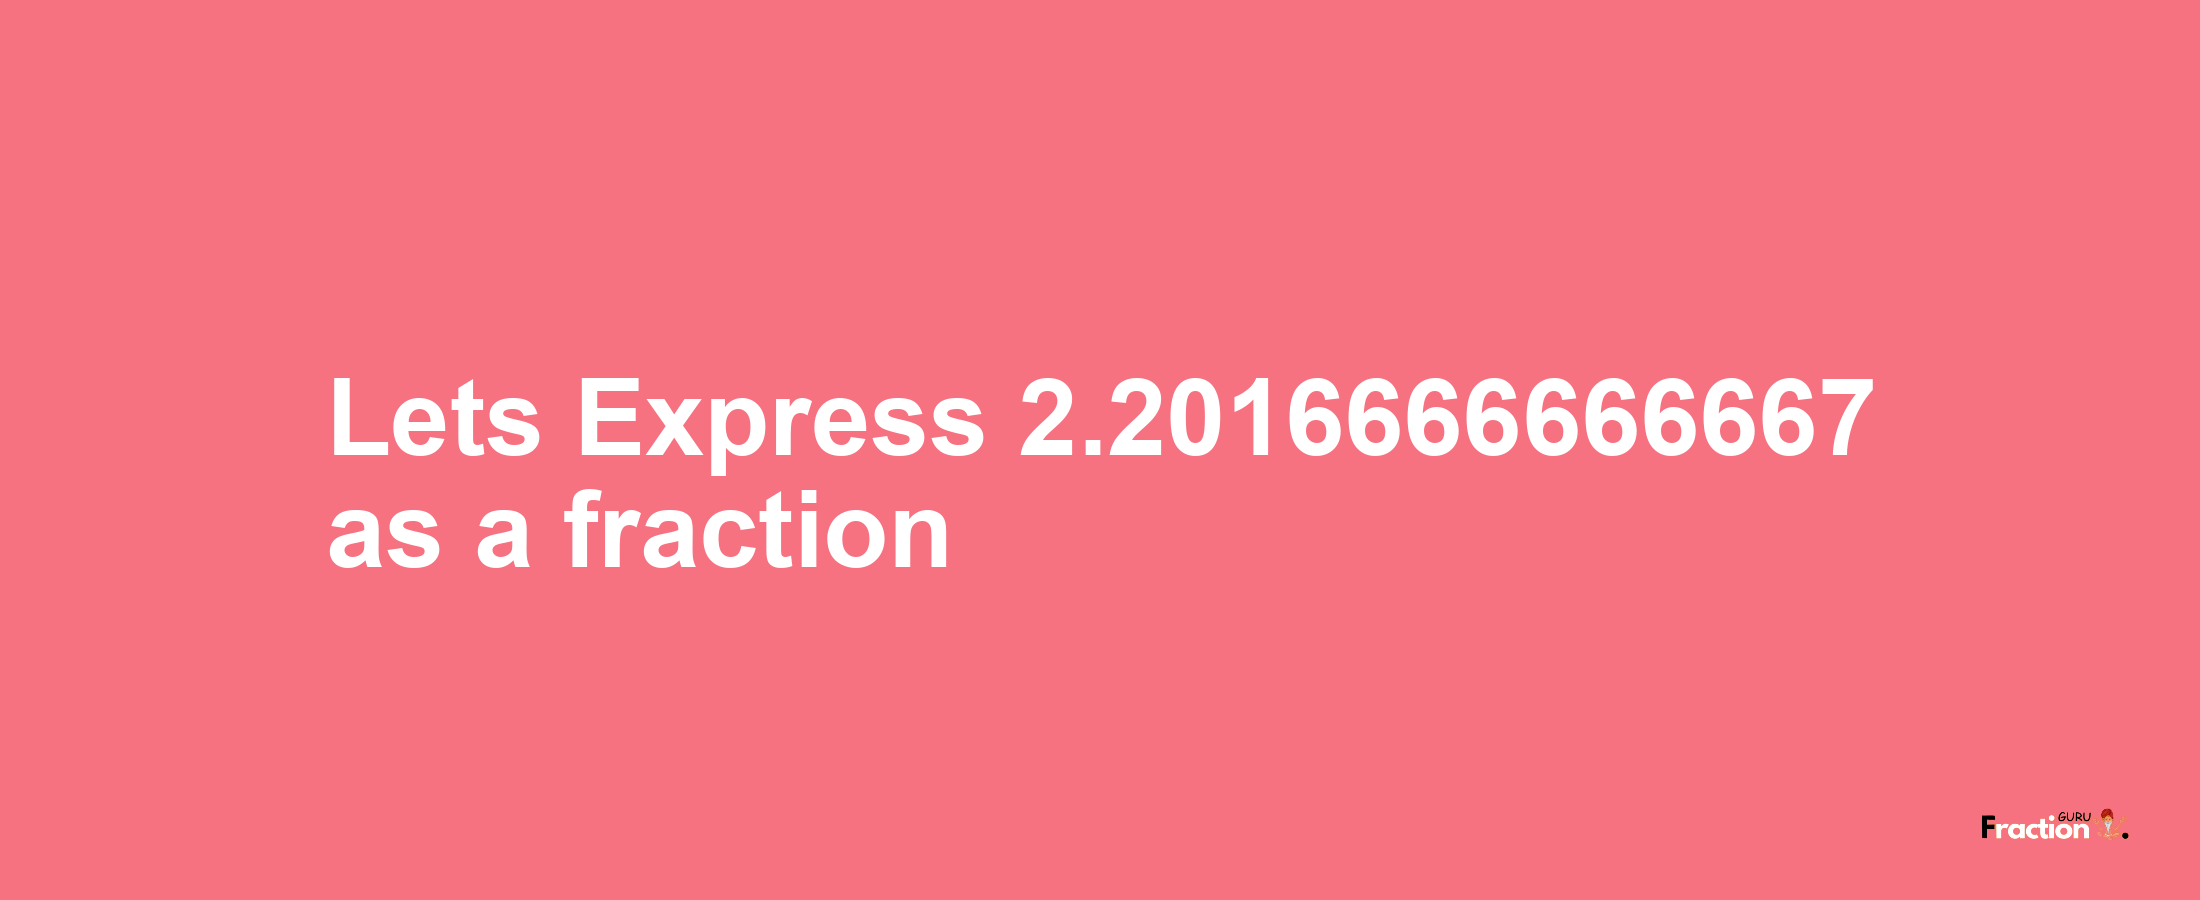 Lets Express 2.2016666666667 as afraction